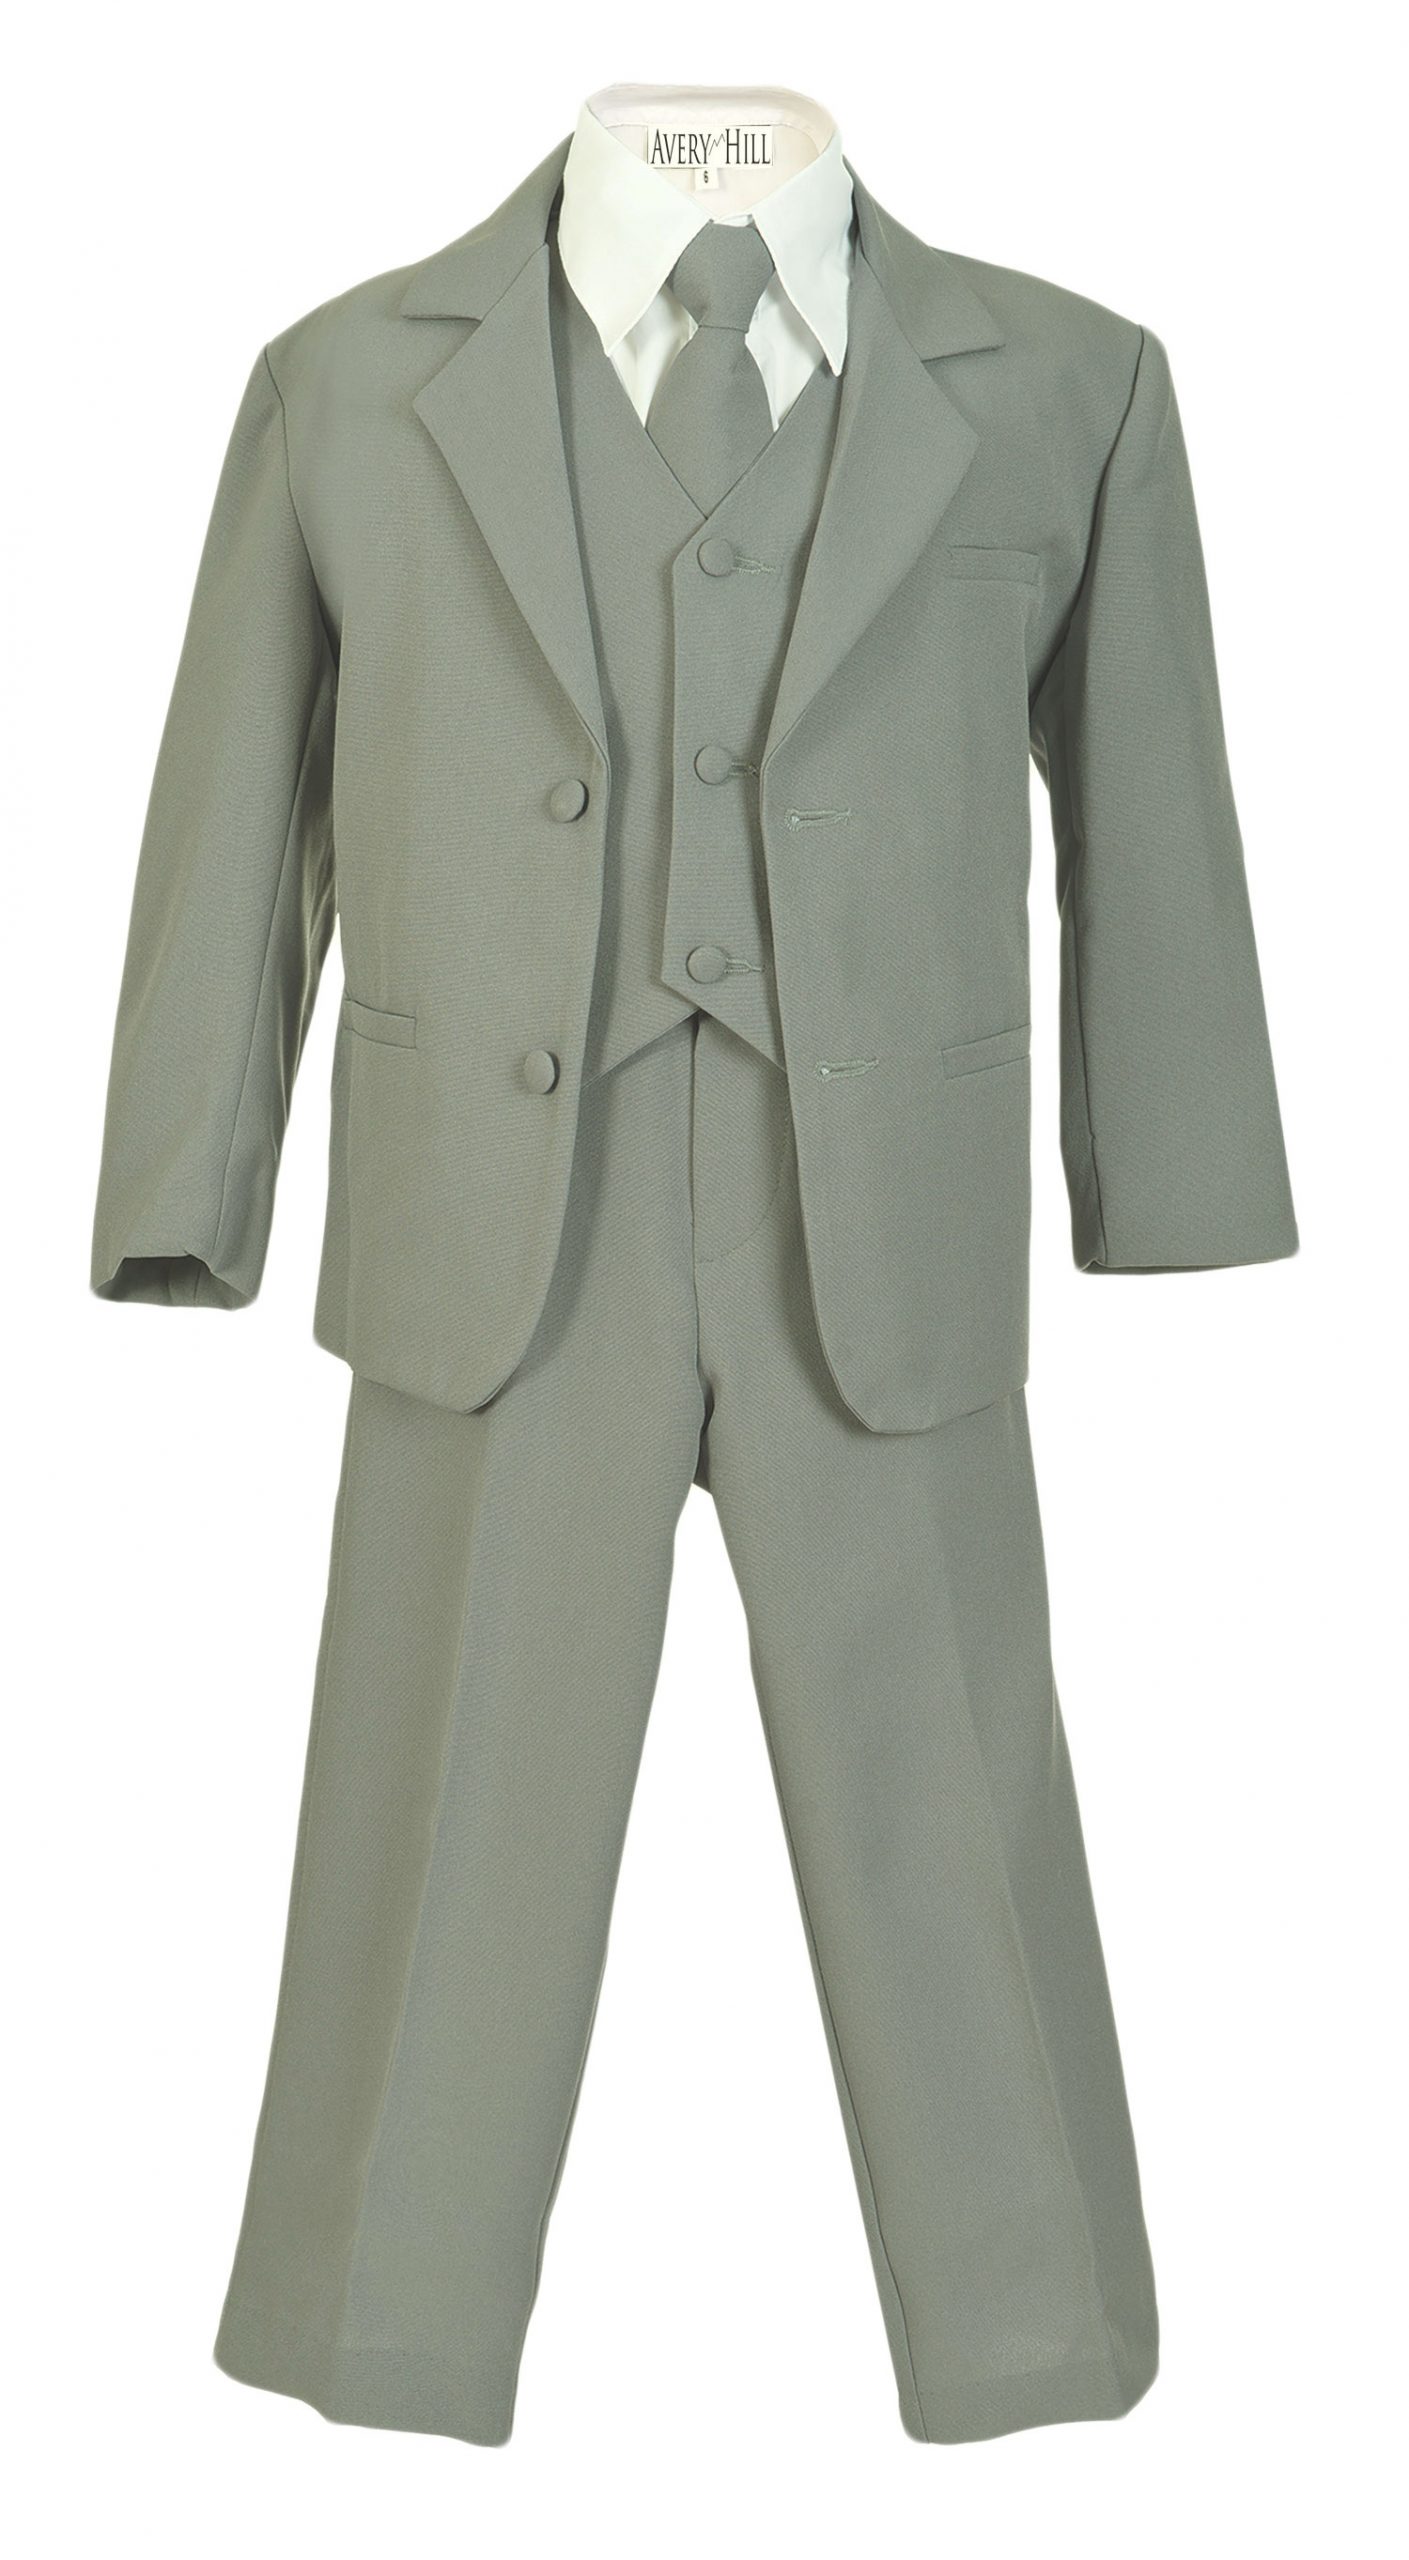 Avery Hill Boys Formal 5 Piece Suit with Shirt and Vest Silver White - XL